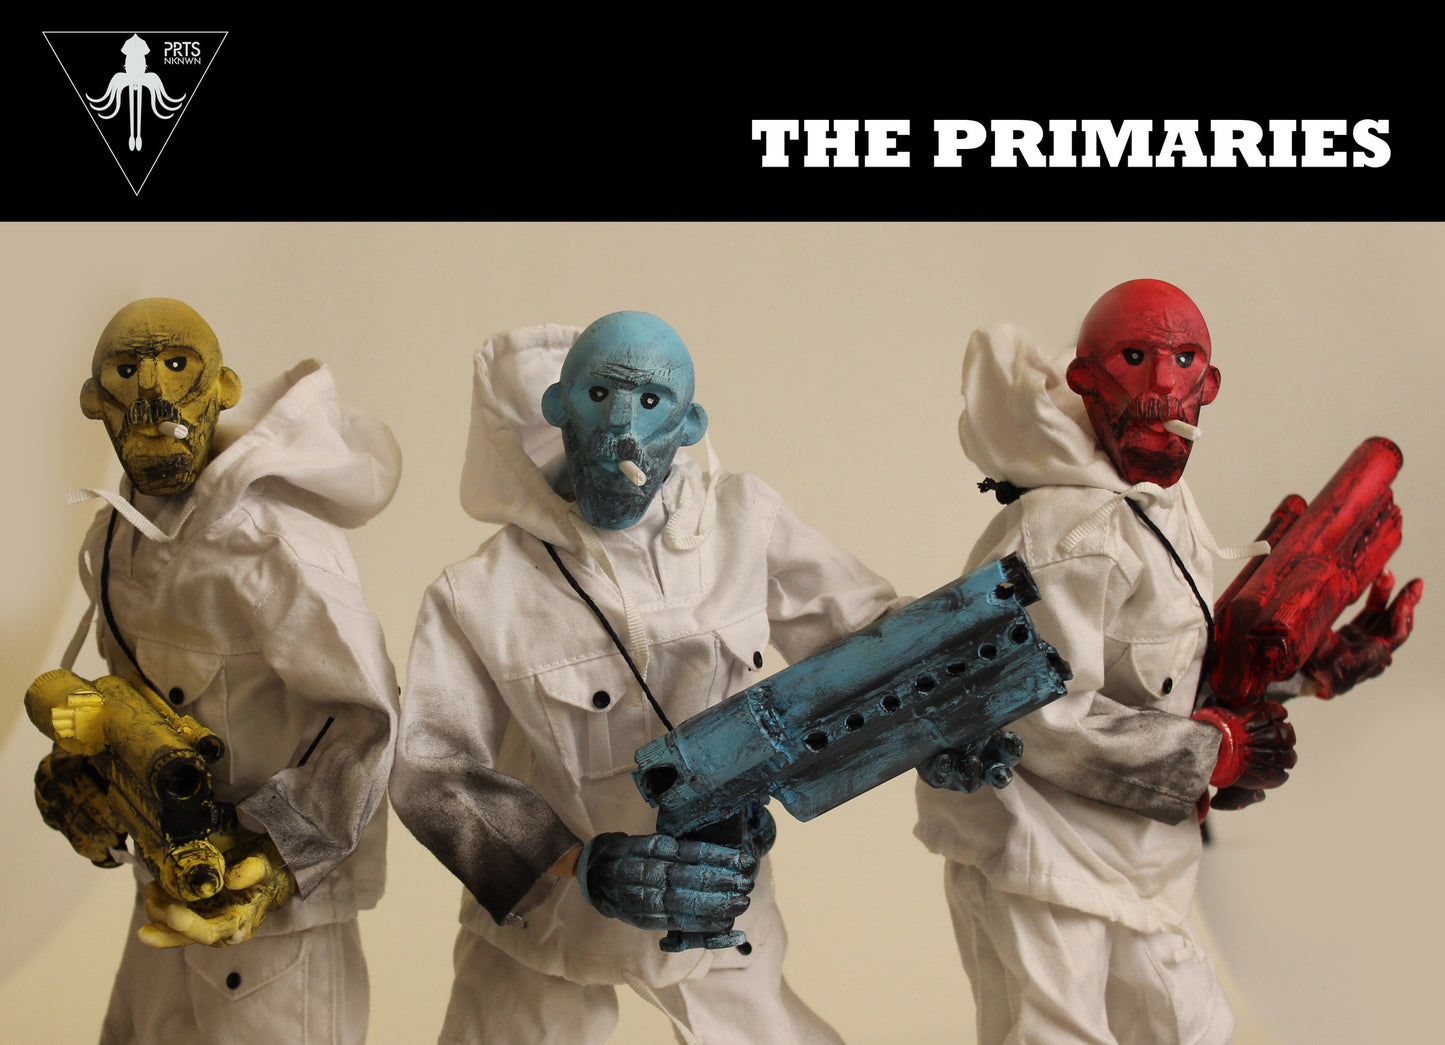 The Primaries 1/6 Scale Set from PRTSNKNWN